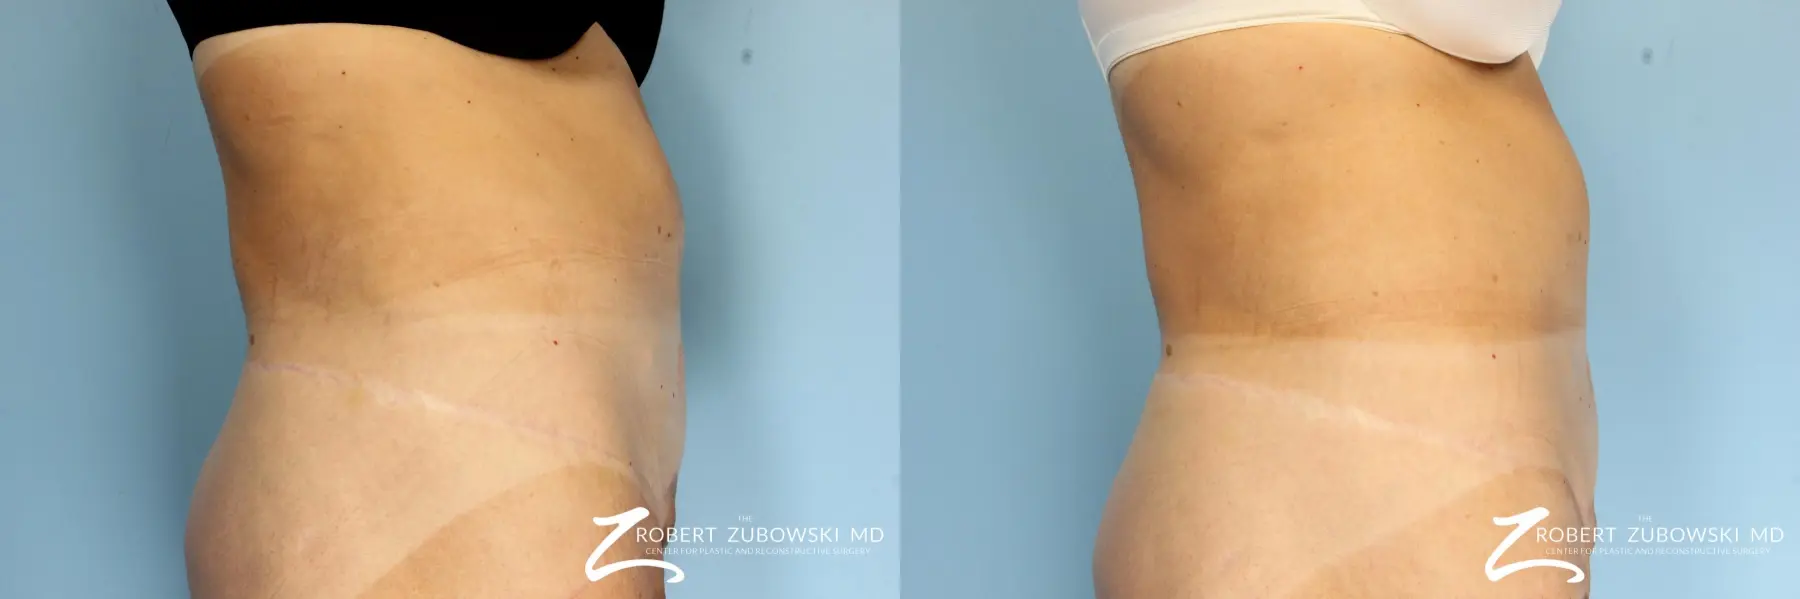 CoolSculpting®: Patient 1 - Before and After 2